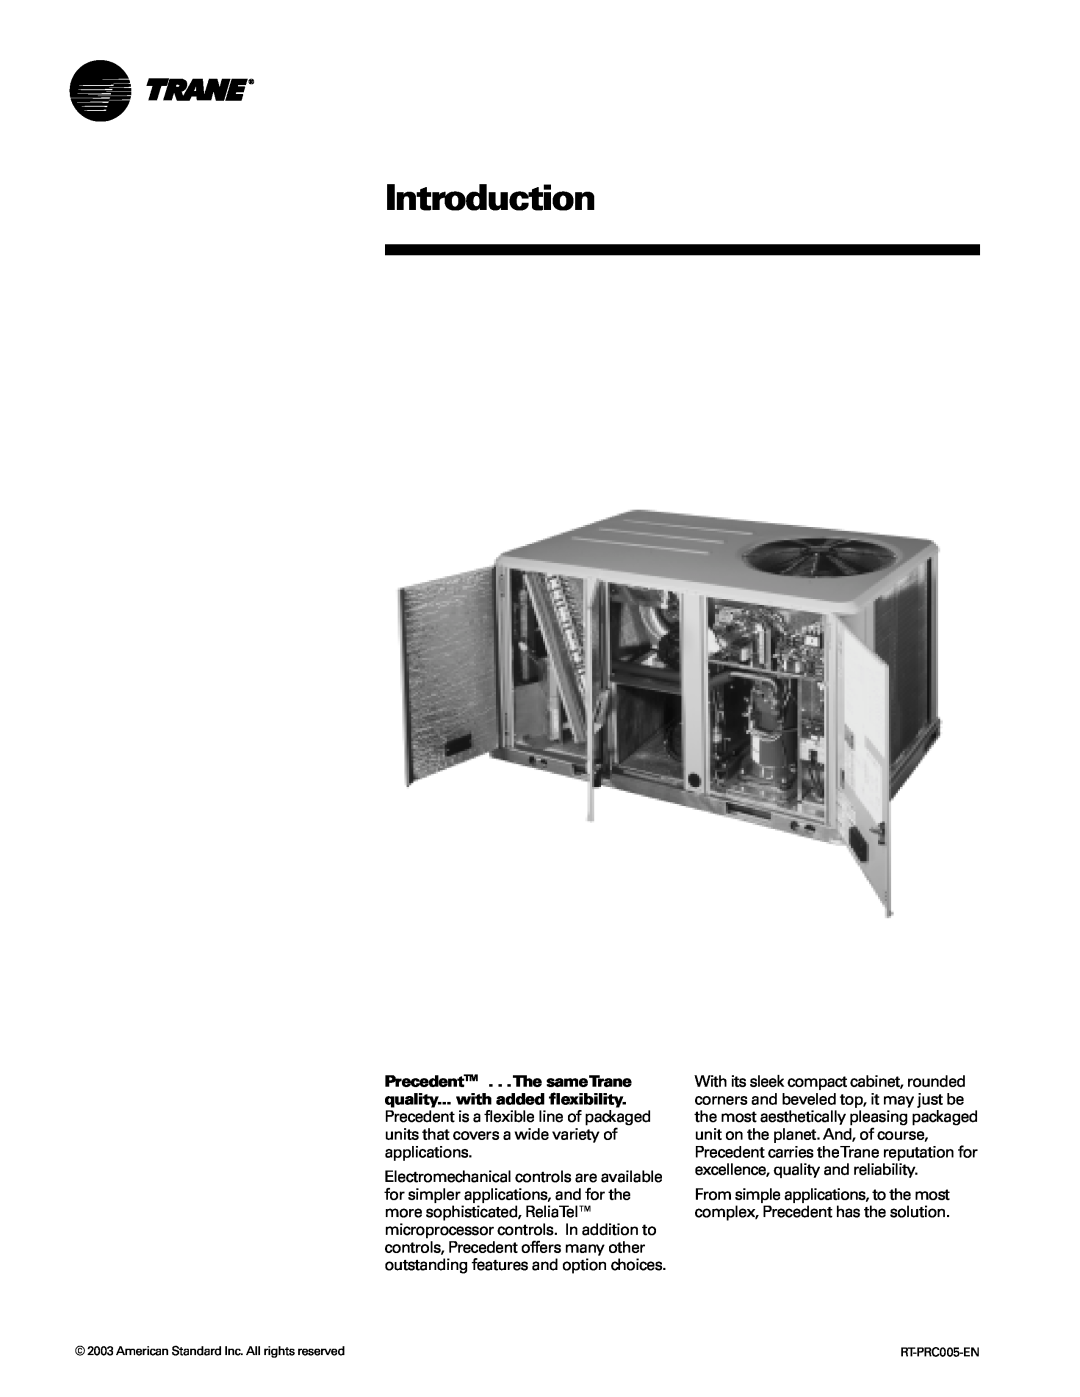 Trane RT-PRC005 manual Introduction, American Standard Inc. All rights reserved 